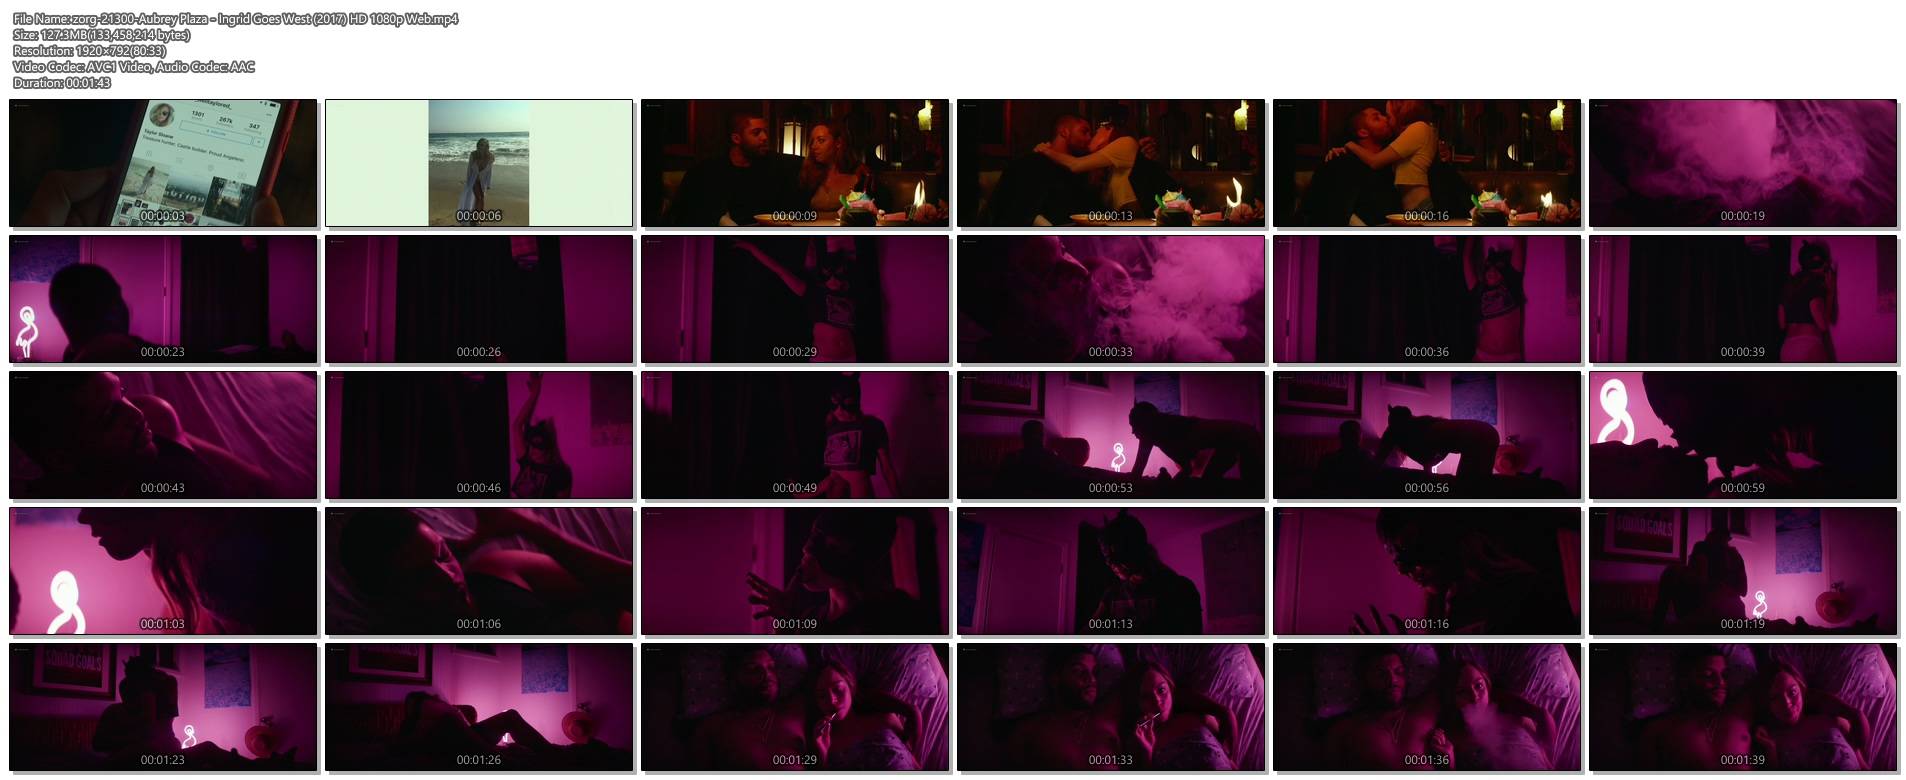 Aubrey Plaza Hot Sexy And Some Sex Ingrid Goes West 2017 Hd 1080p Web